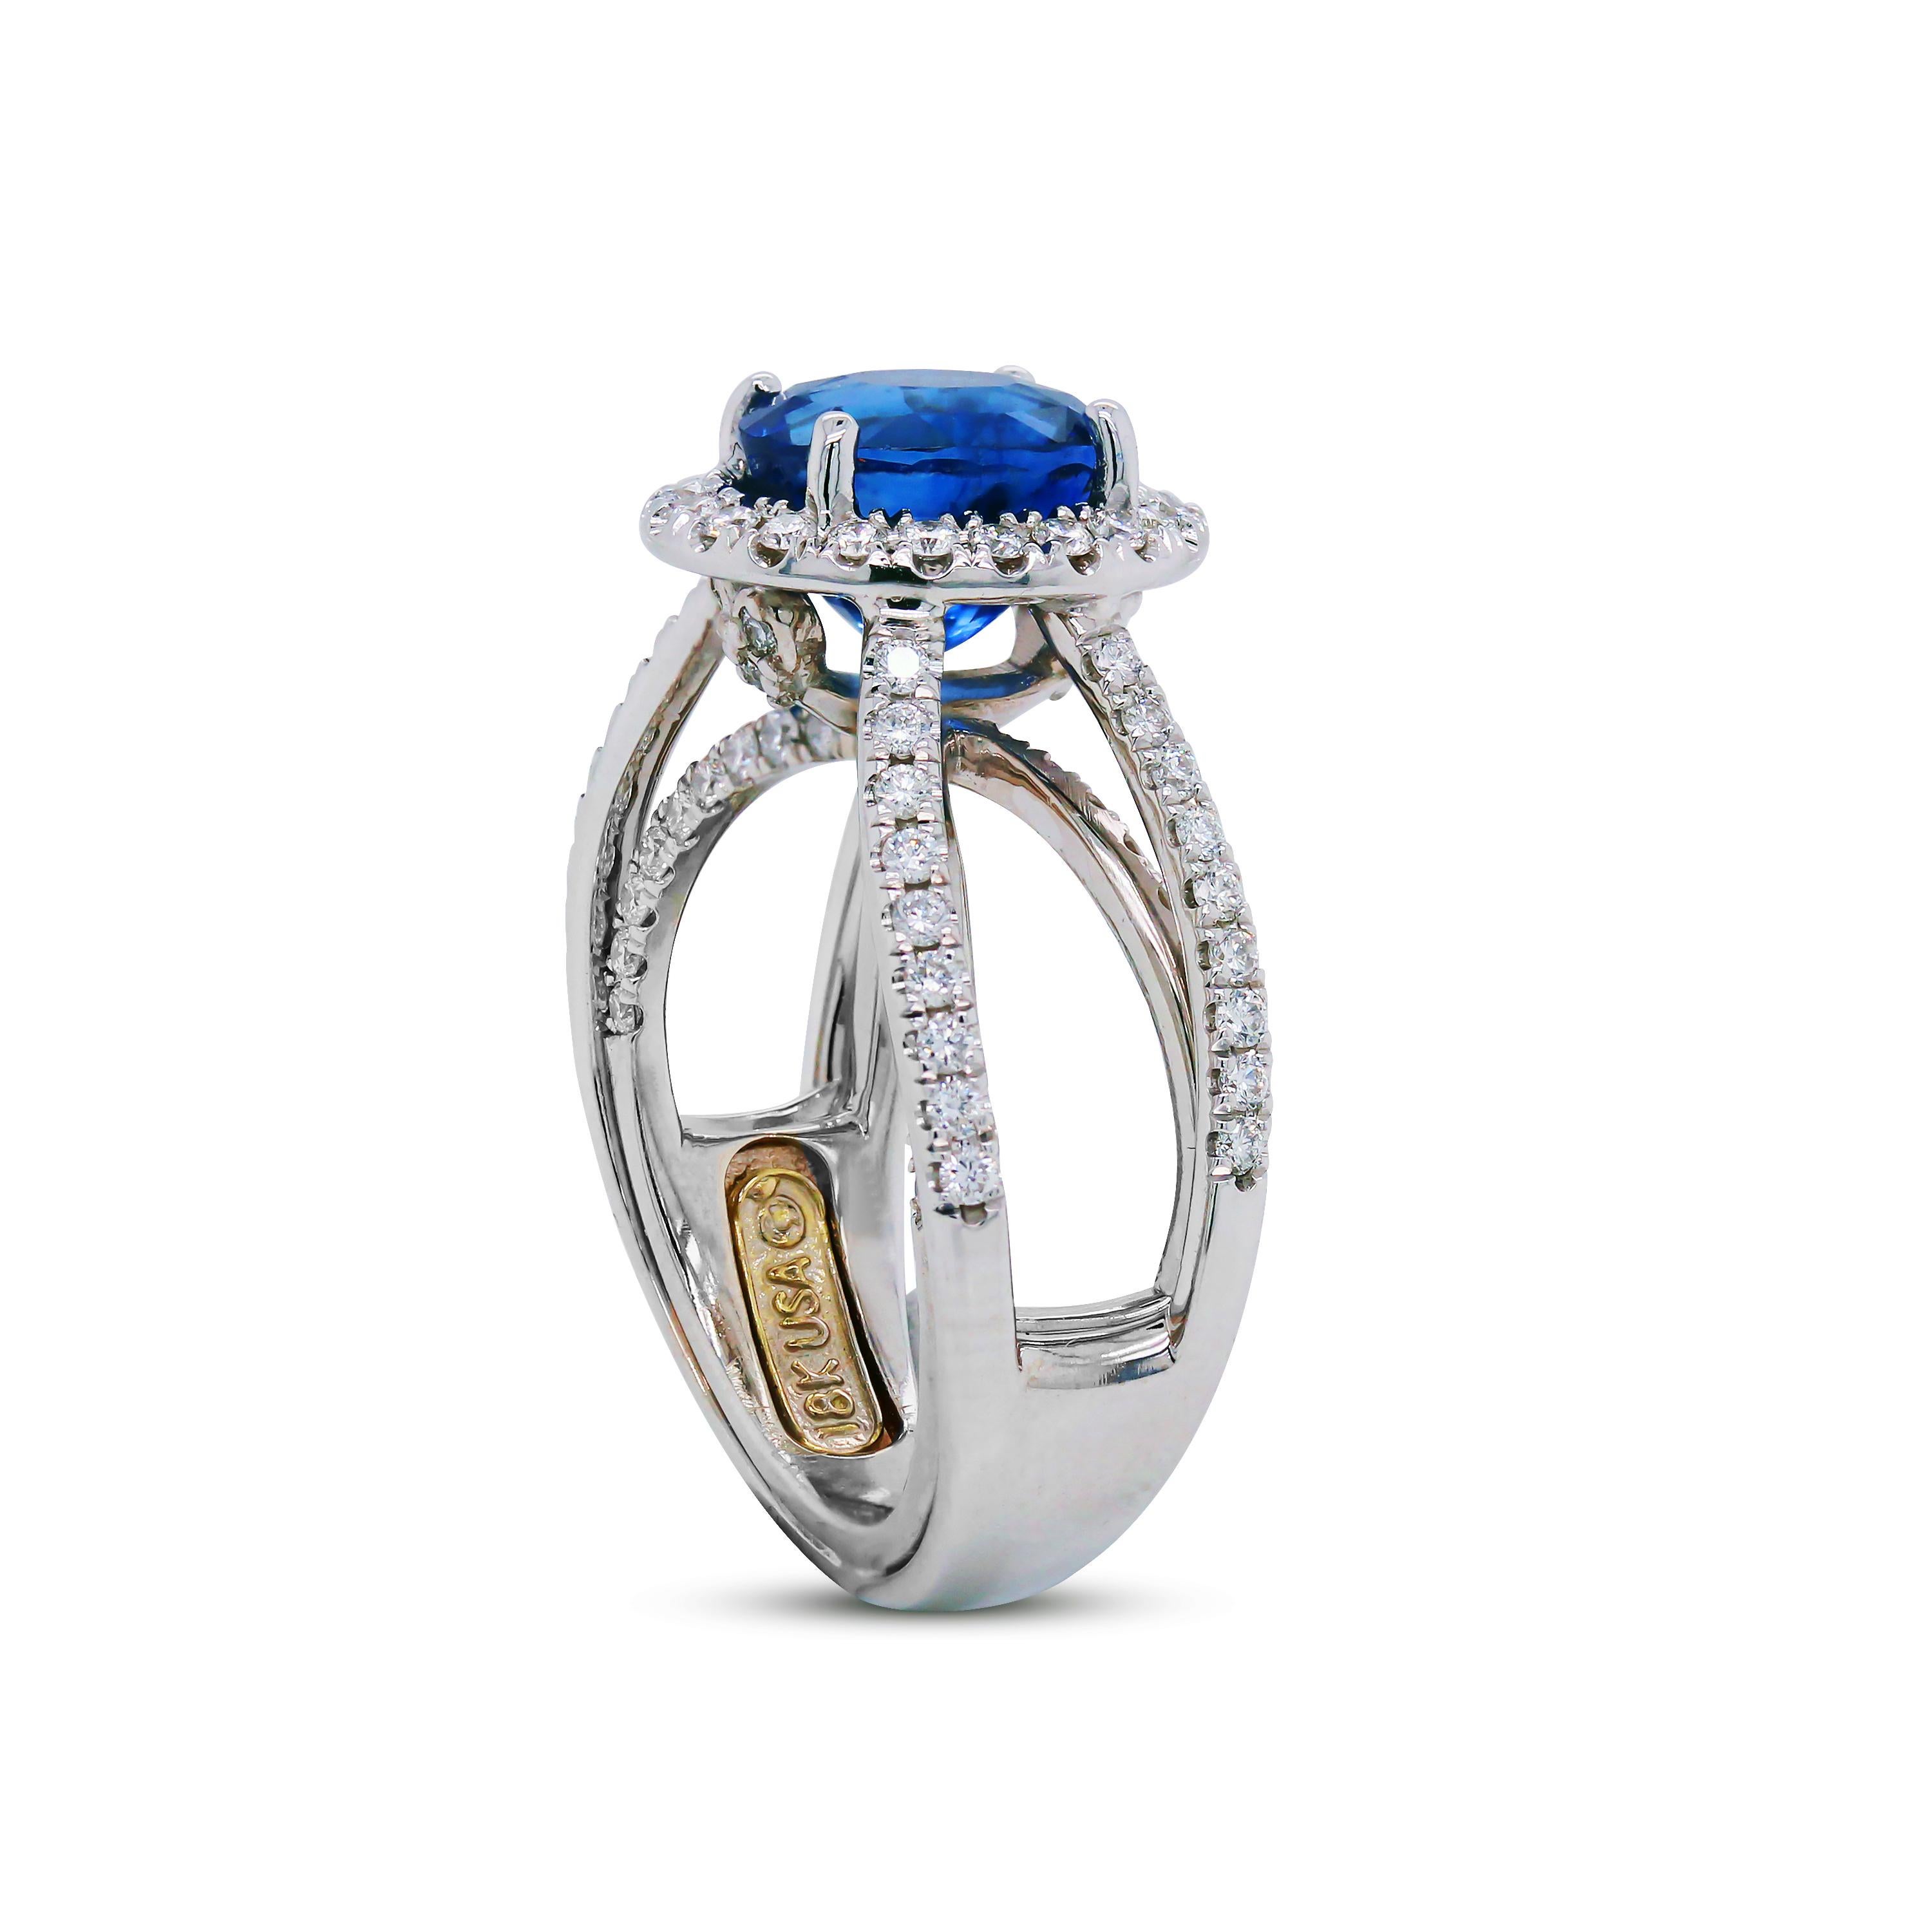 Stambolian 3.48 Carat Oval Blue Sapphire 18K White Gold Diamond Cocktail Ring

This one-of-a-kind ring by Stambolian features a double-band ring set with diamonds that lead to the center Blue sapphire.

Blue Sapphire is 3.48 carat, oval. 

0.77